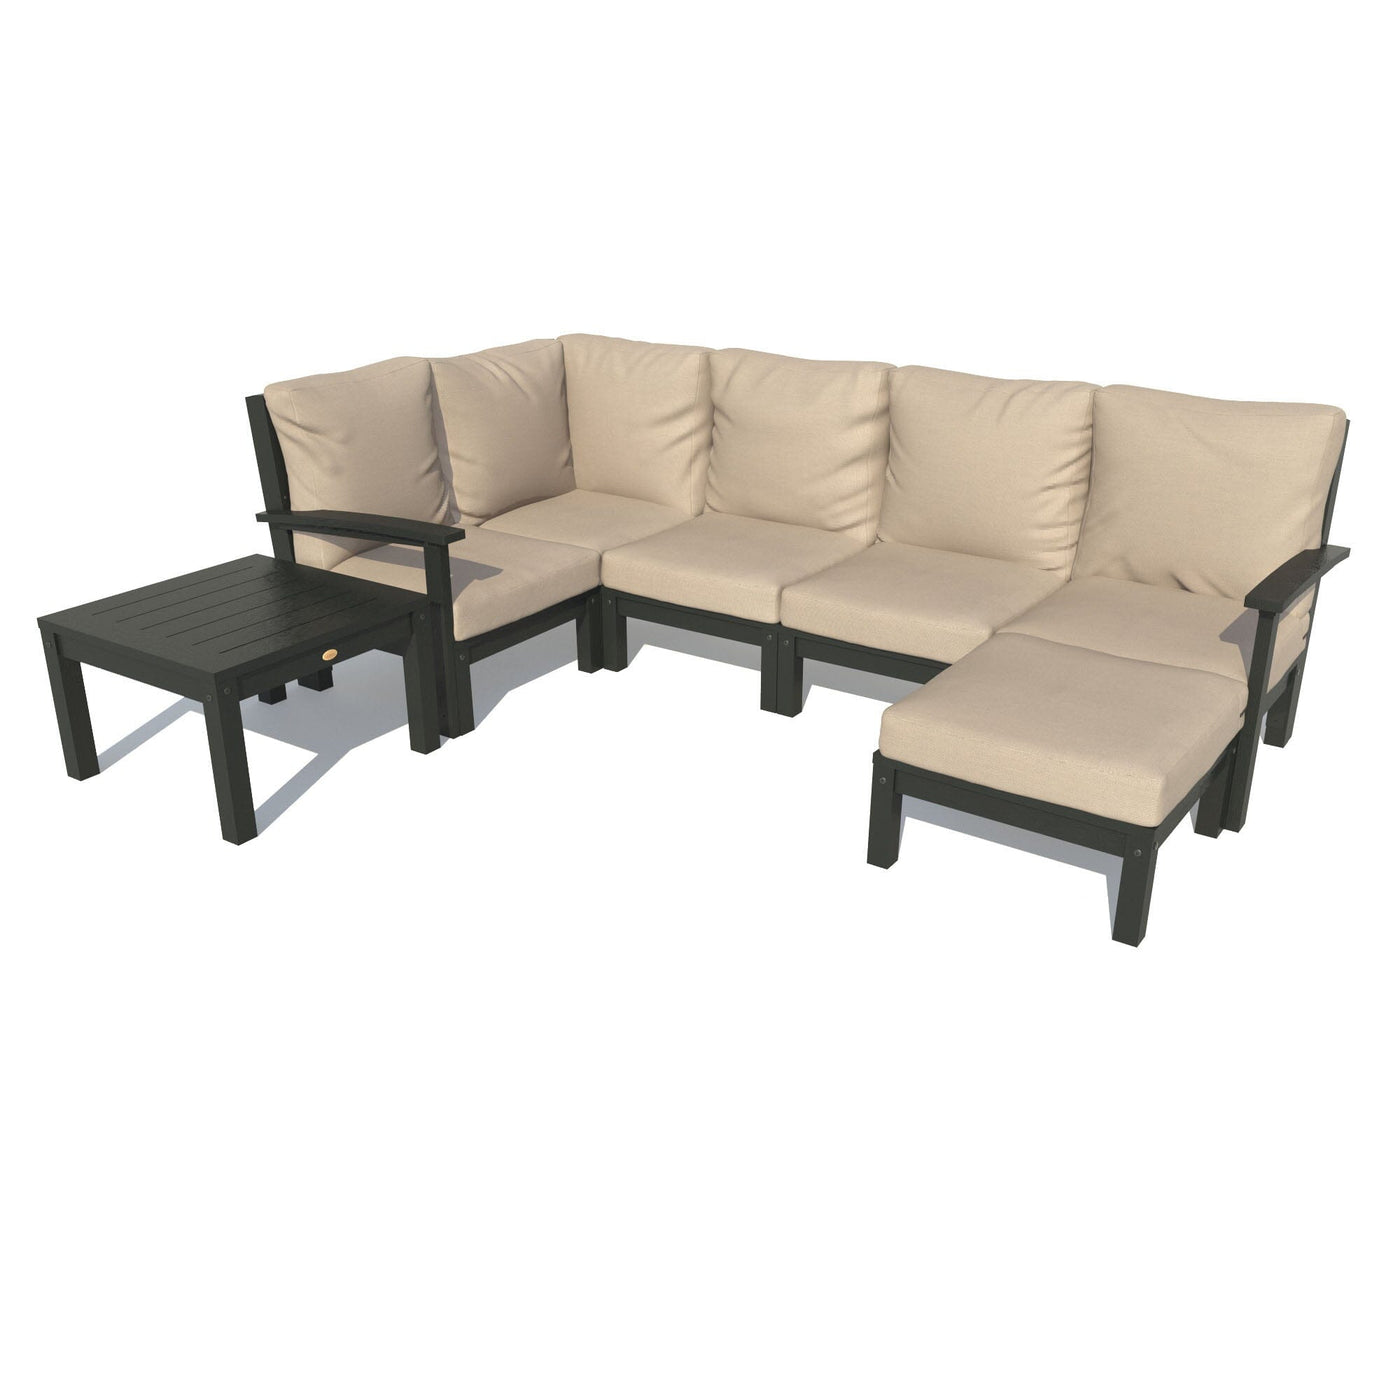 Bespoke Deep Seating: 7 Piece Sectional Set with Ottoman and Side Table Deep Seating Highwood USA Driftwood Black 